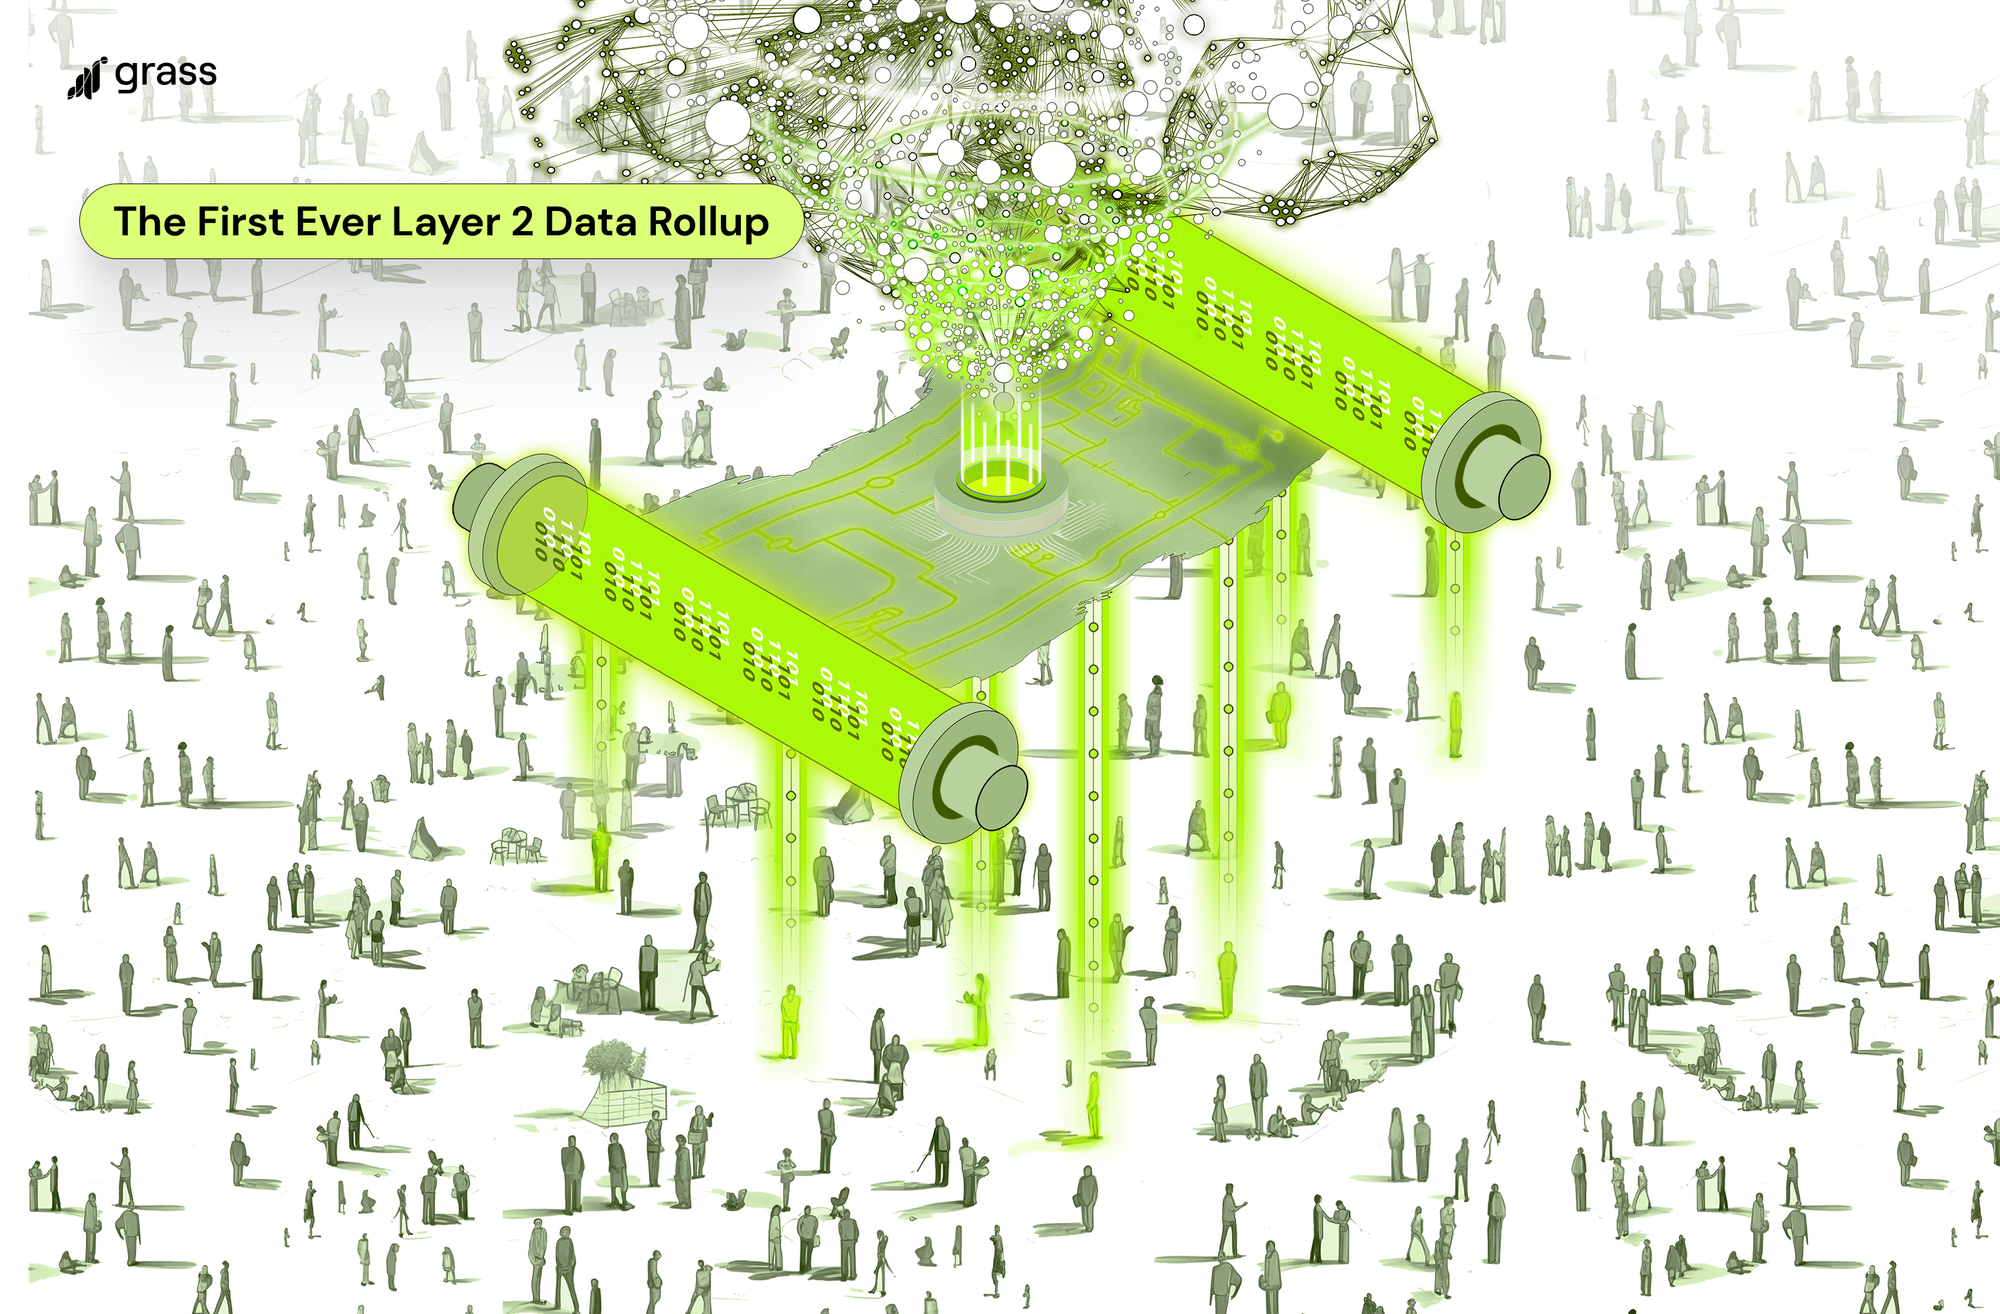 Grass: The First Ever Layer 2 Data Rollup